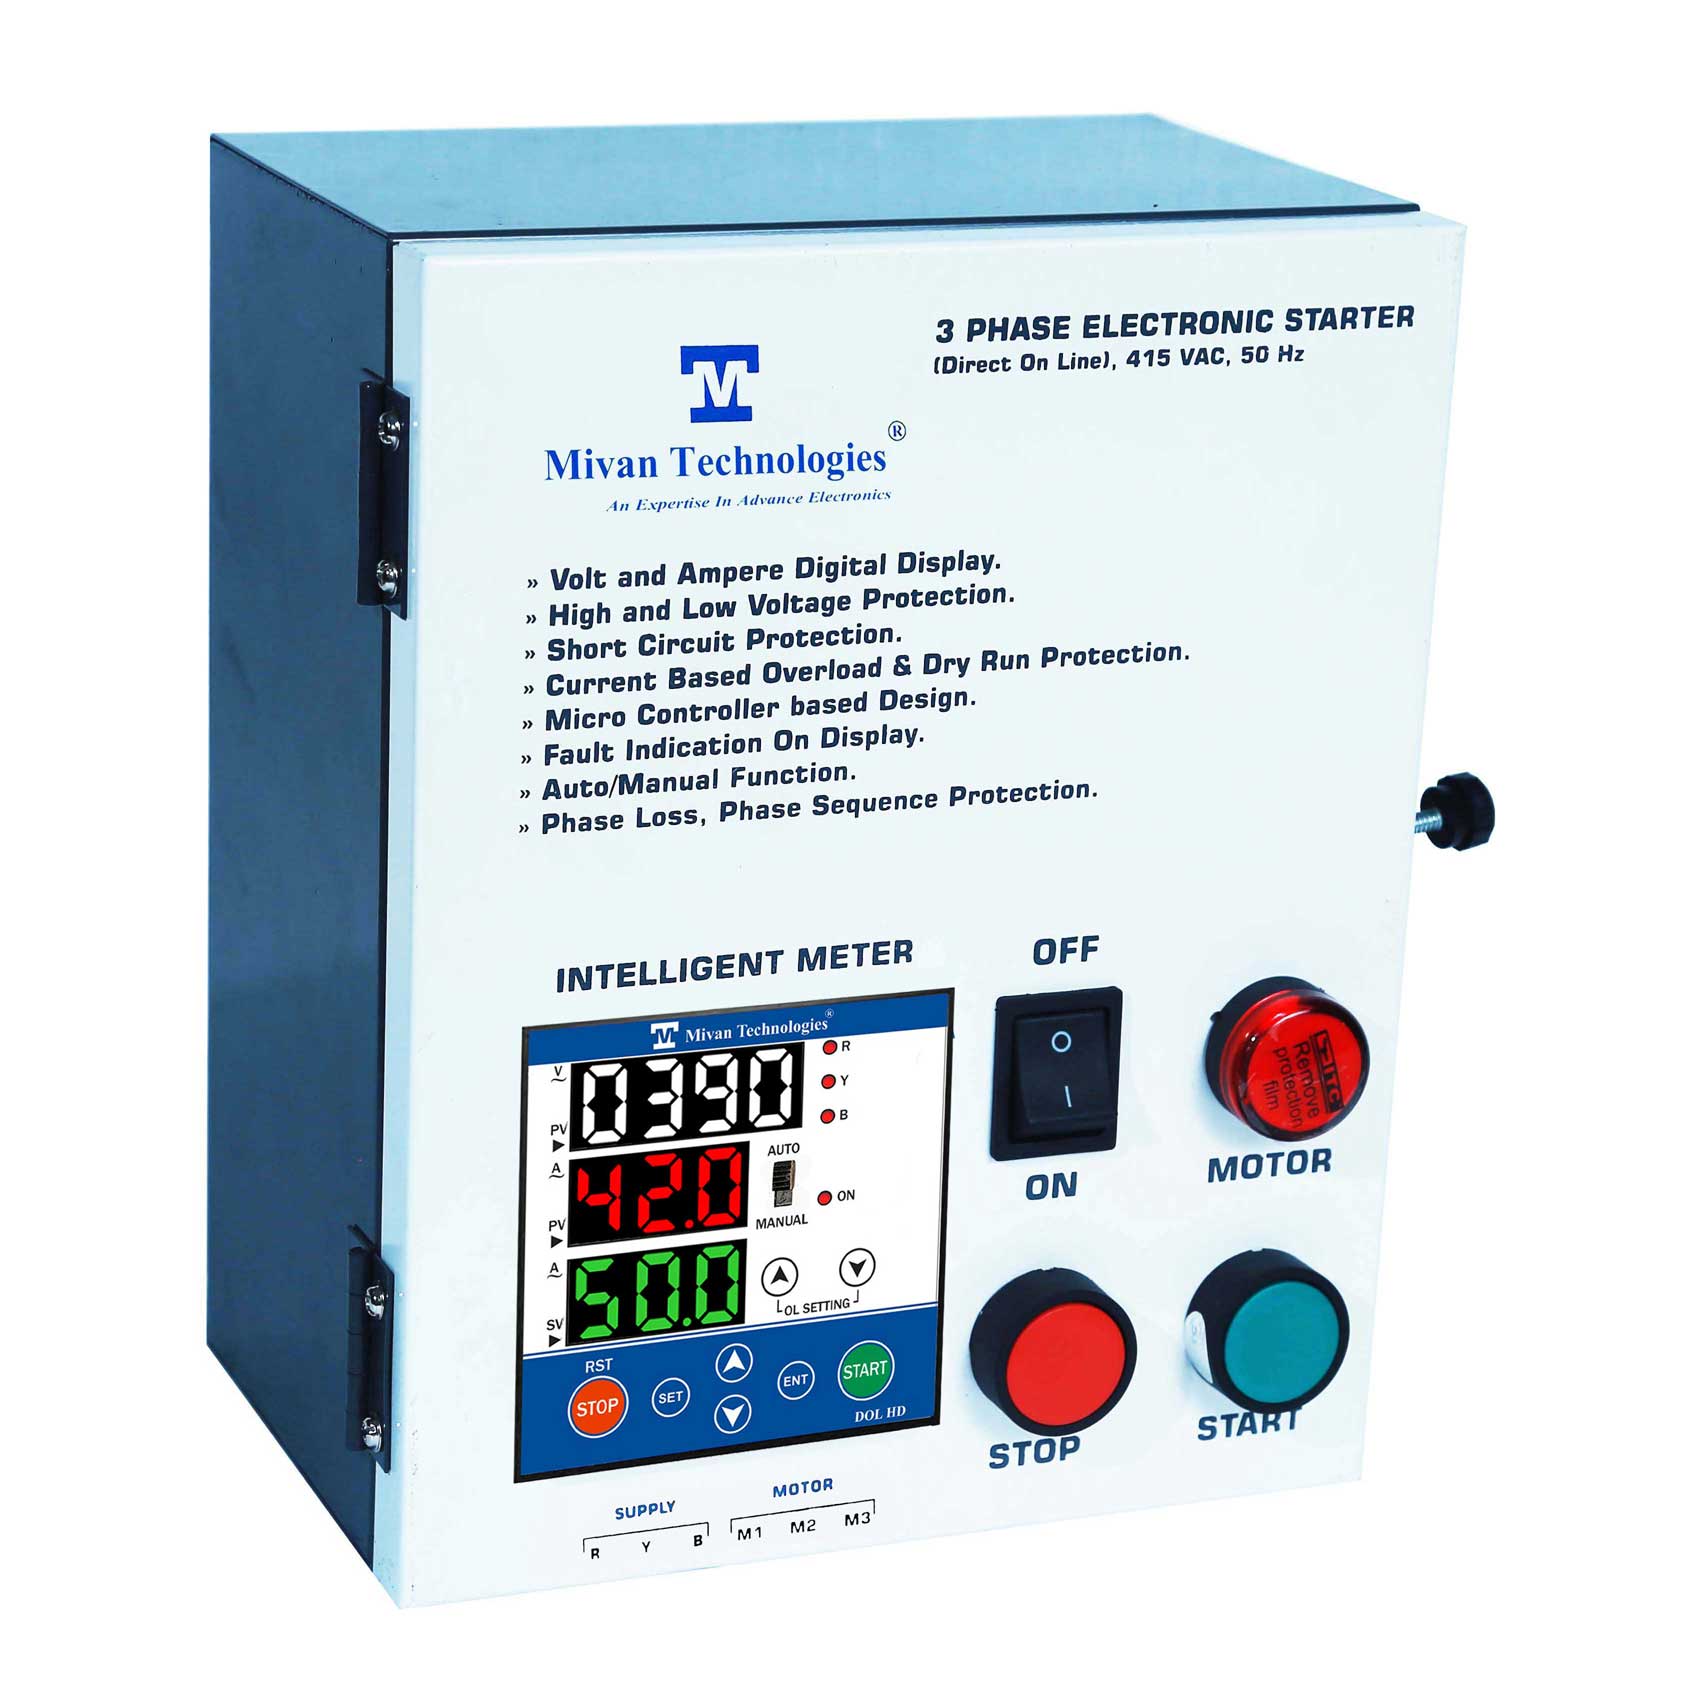 3 phase 3 display Heavy Duty DOL motor starter with HV LV OL Dry protection with Auto switch spp and timer suitable up to 20 hp DOL HD 3D 40 A